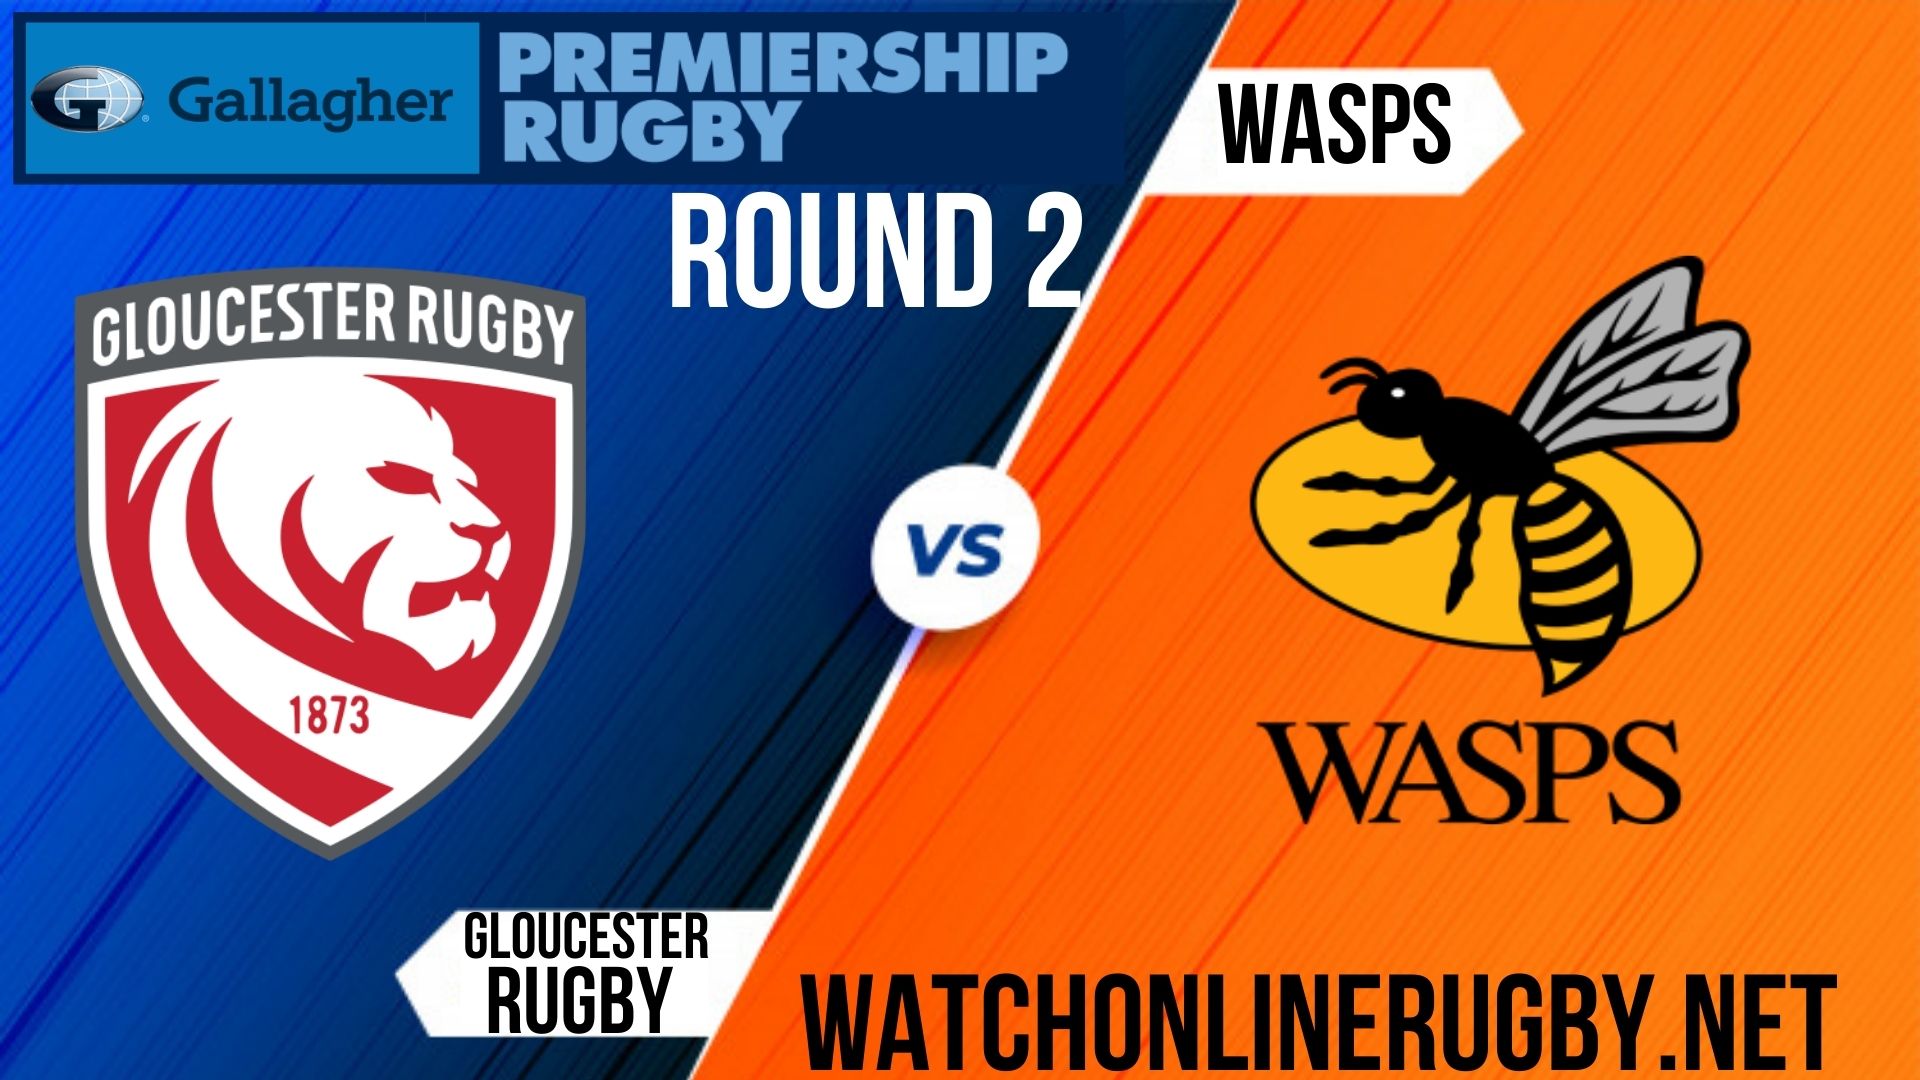 Gloucester Rugby vs Wasps Premiership Rugby 2020 RD 2